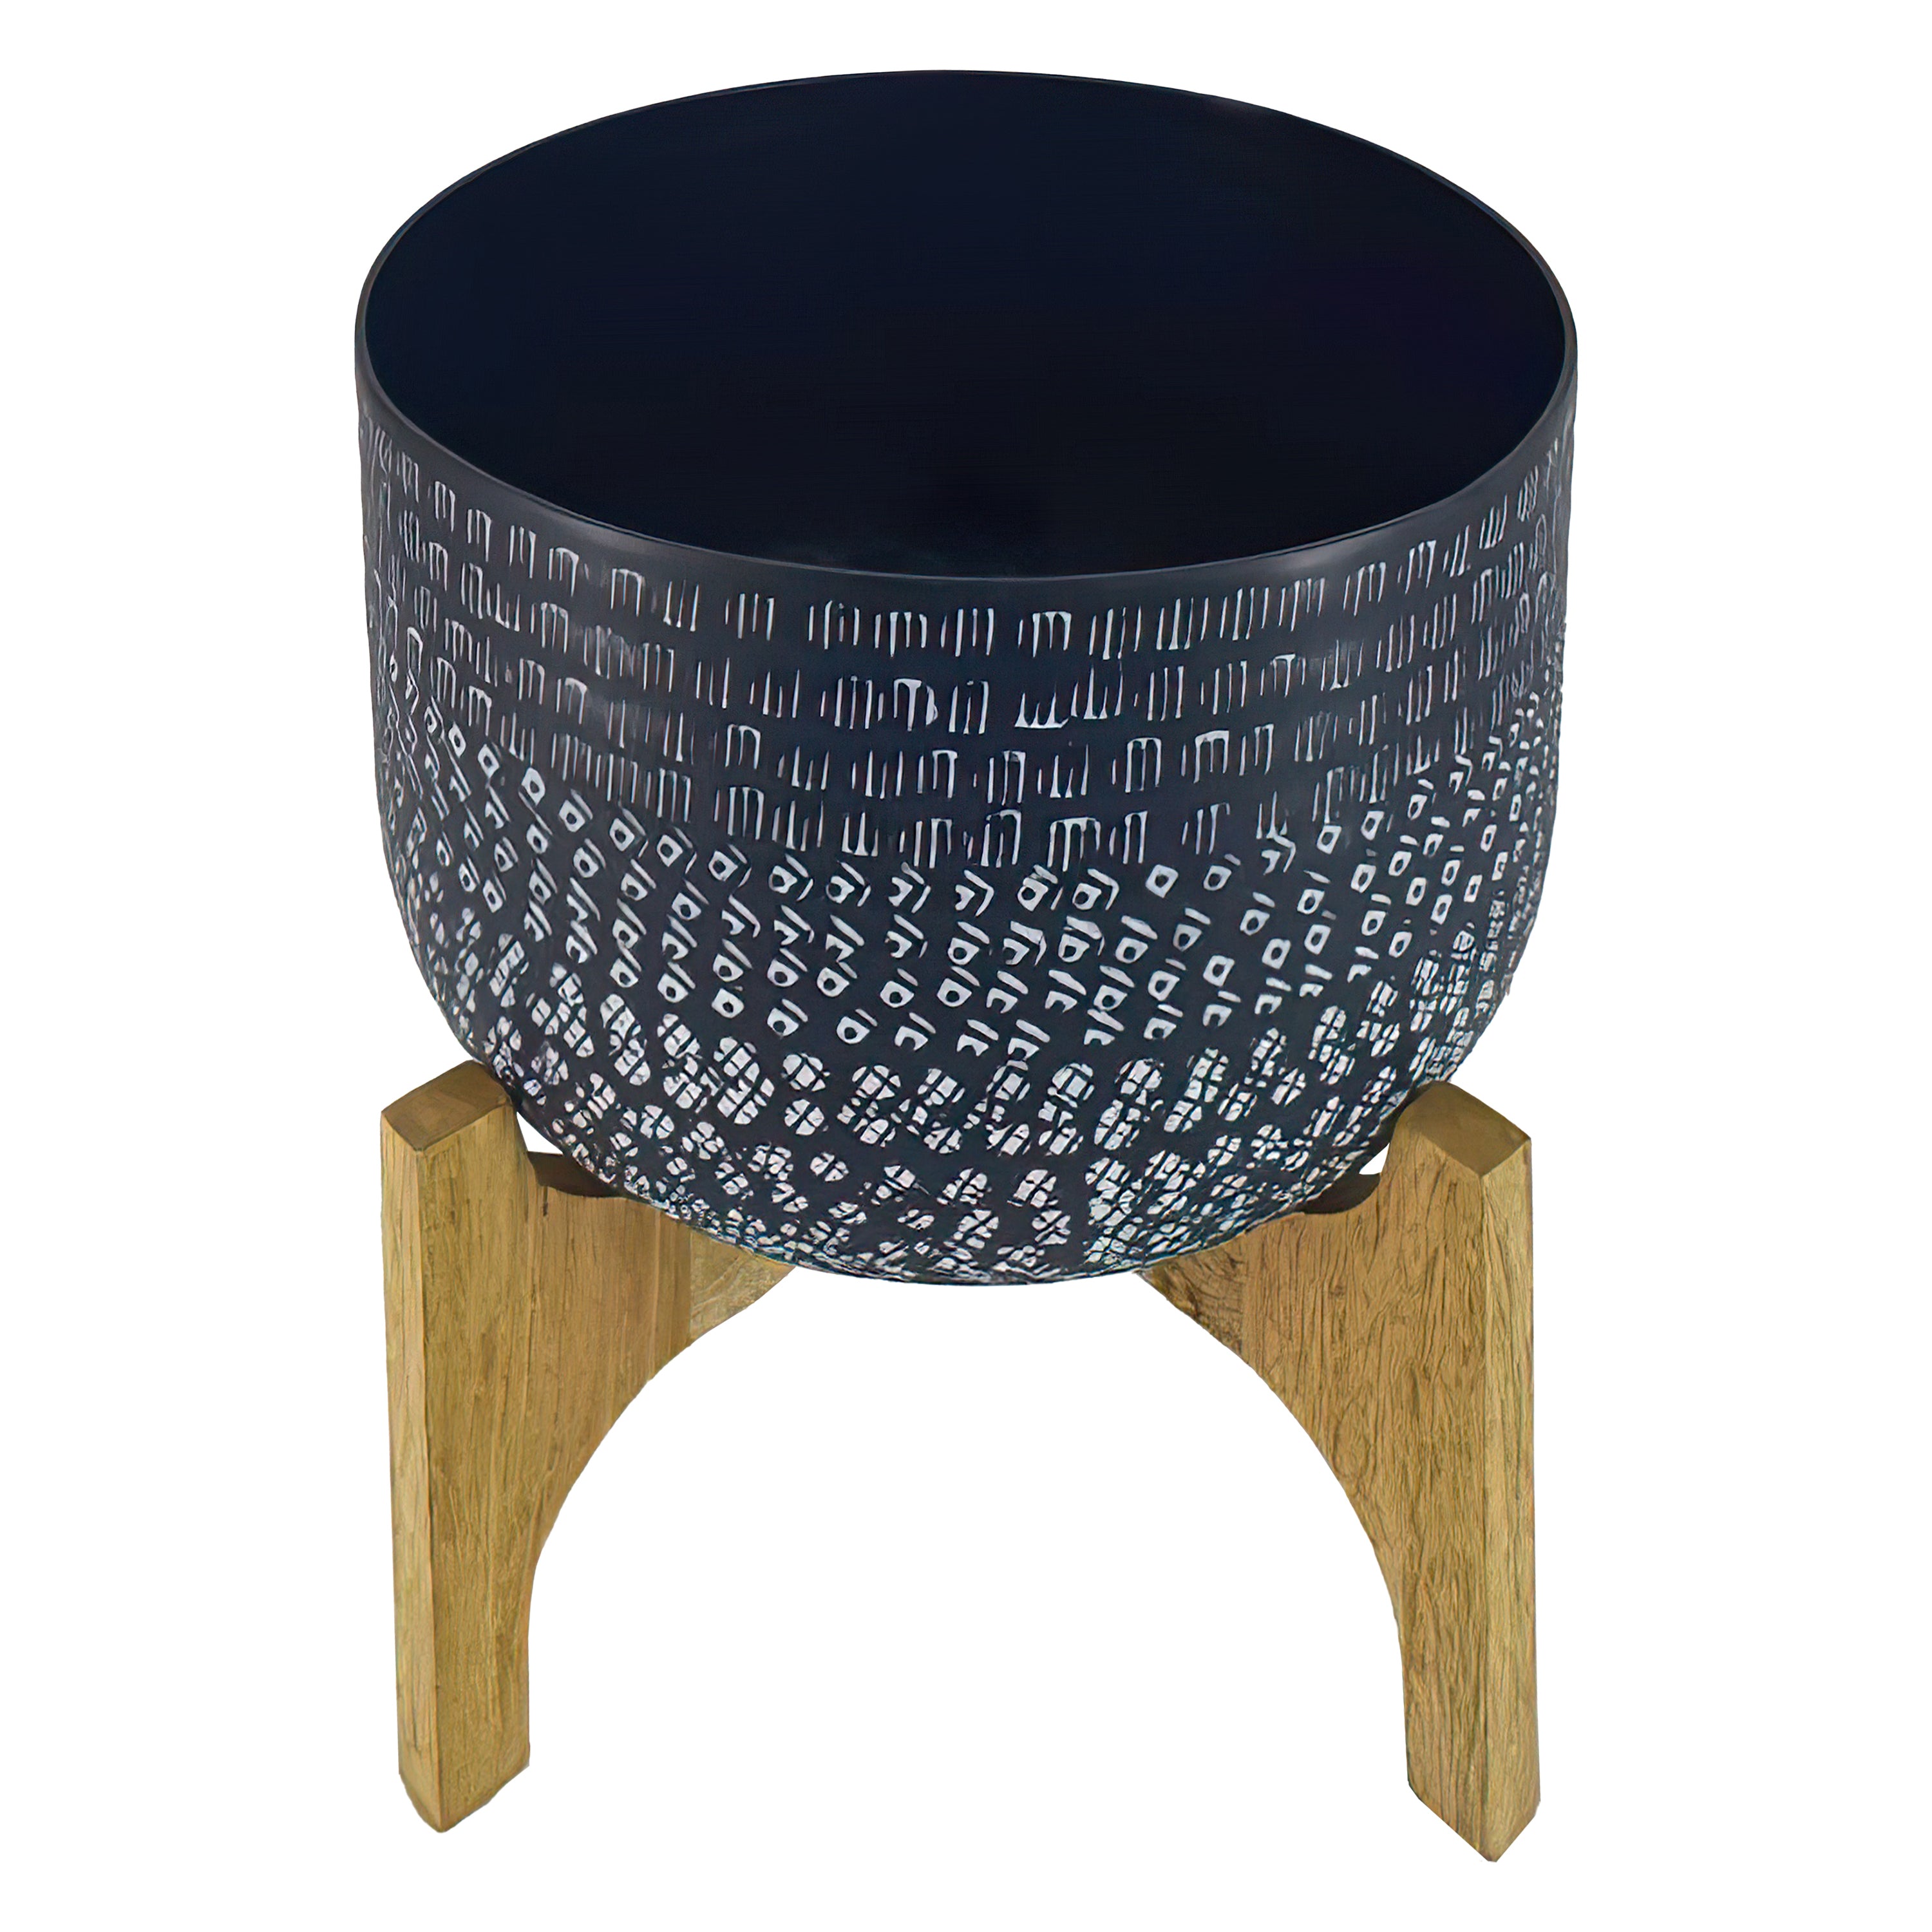 Alex-12-Inch-Artisanal-Industrial-Round-Hammered-Metal-Planter-Pot-with-Wood-Arch-Stand,-Midnight-Blue-Pots-&-Planters